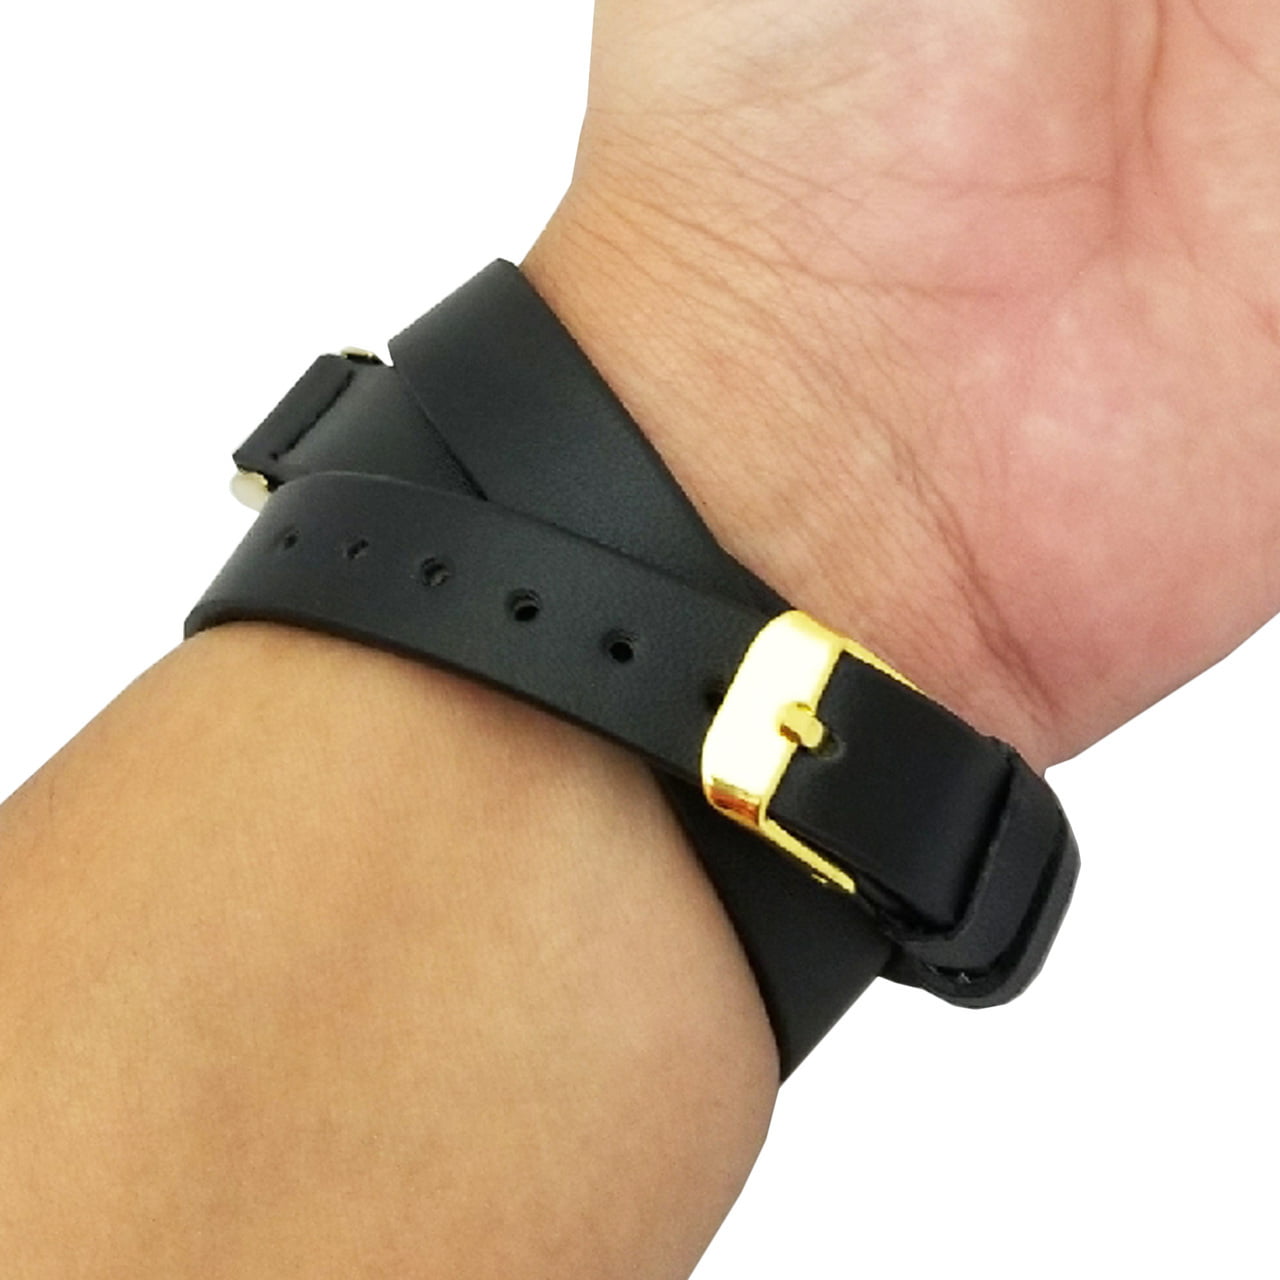 Kate Single Strap Bracelet for the Fitbit Flex with Adjustable buckle closure! 